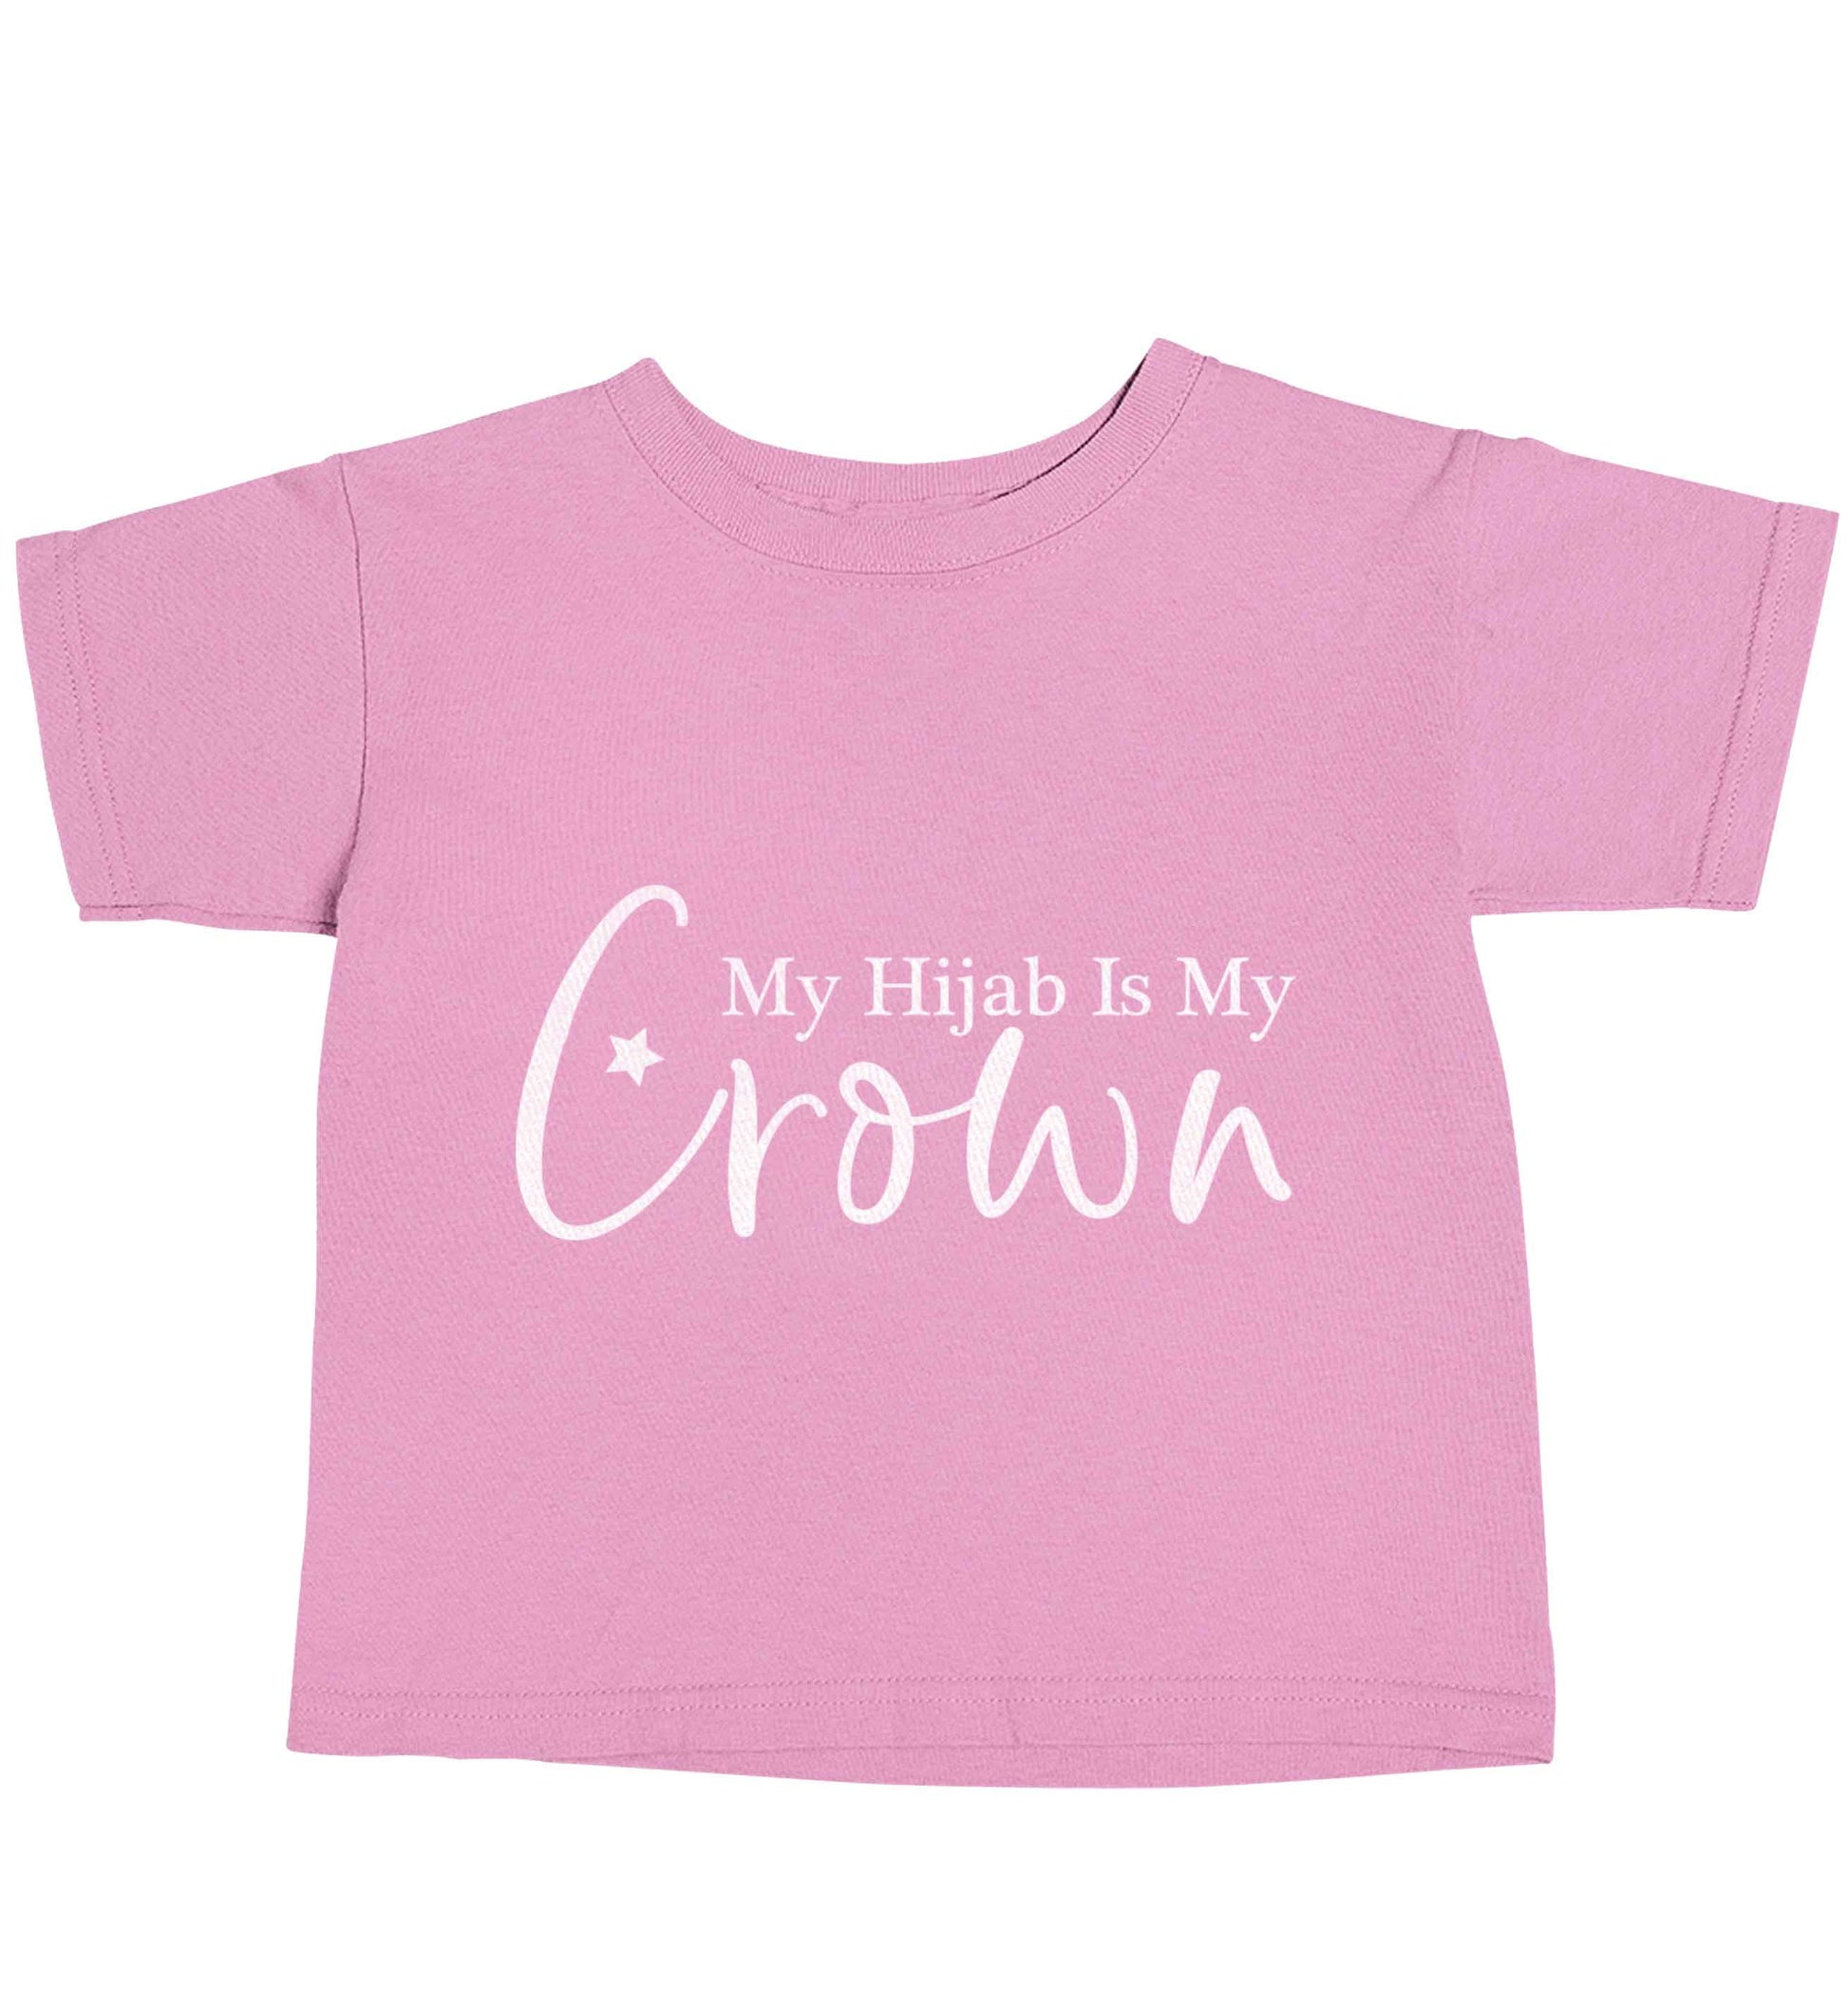 My hijab is my crown light pink baby toddler Tshirt 2 Years